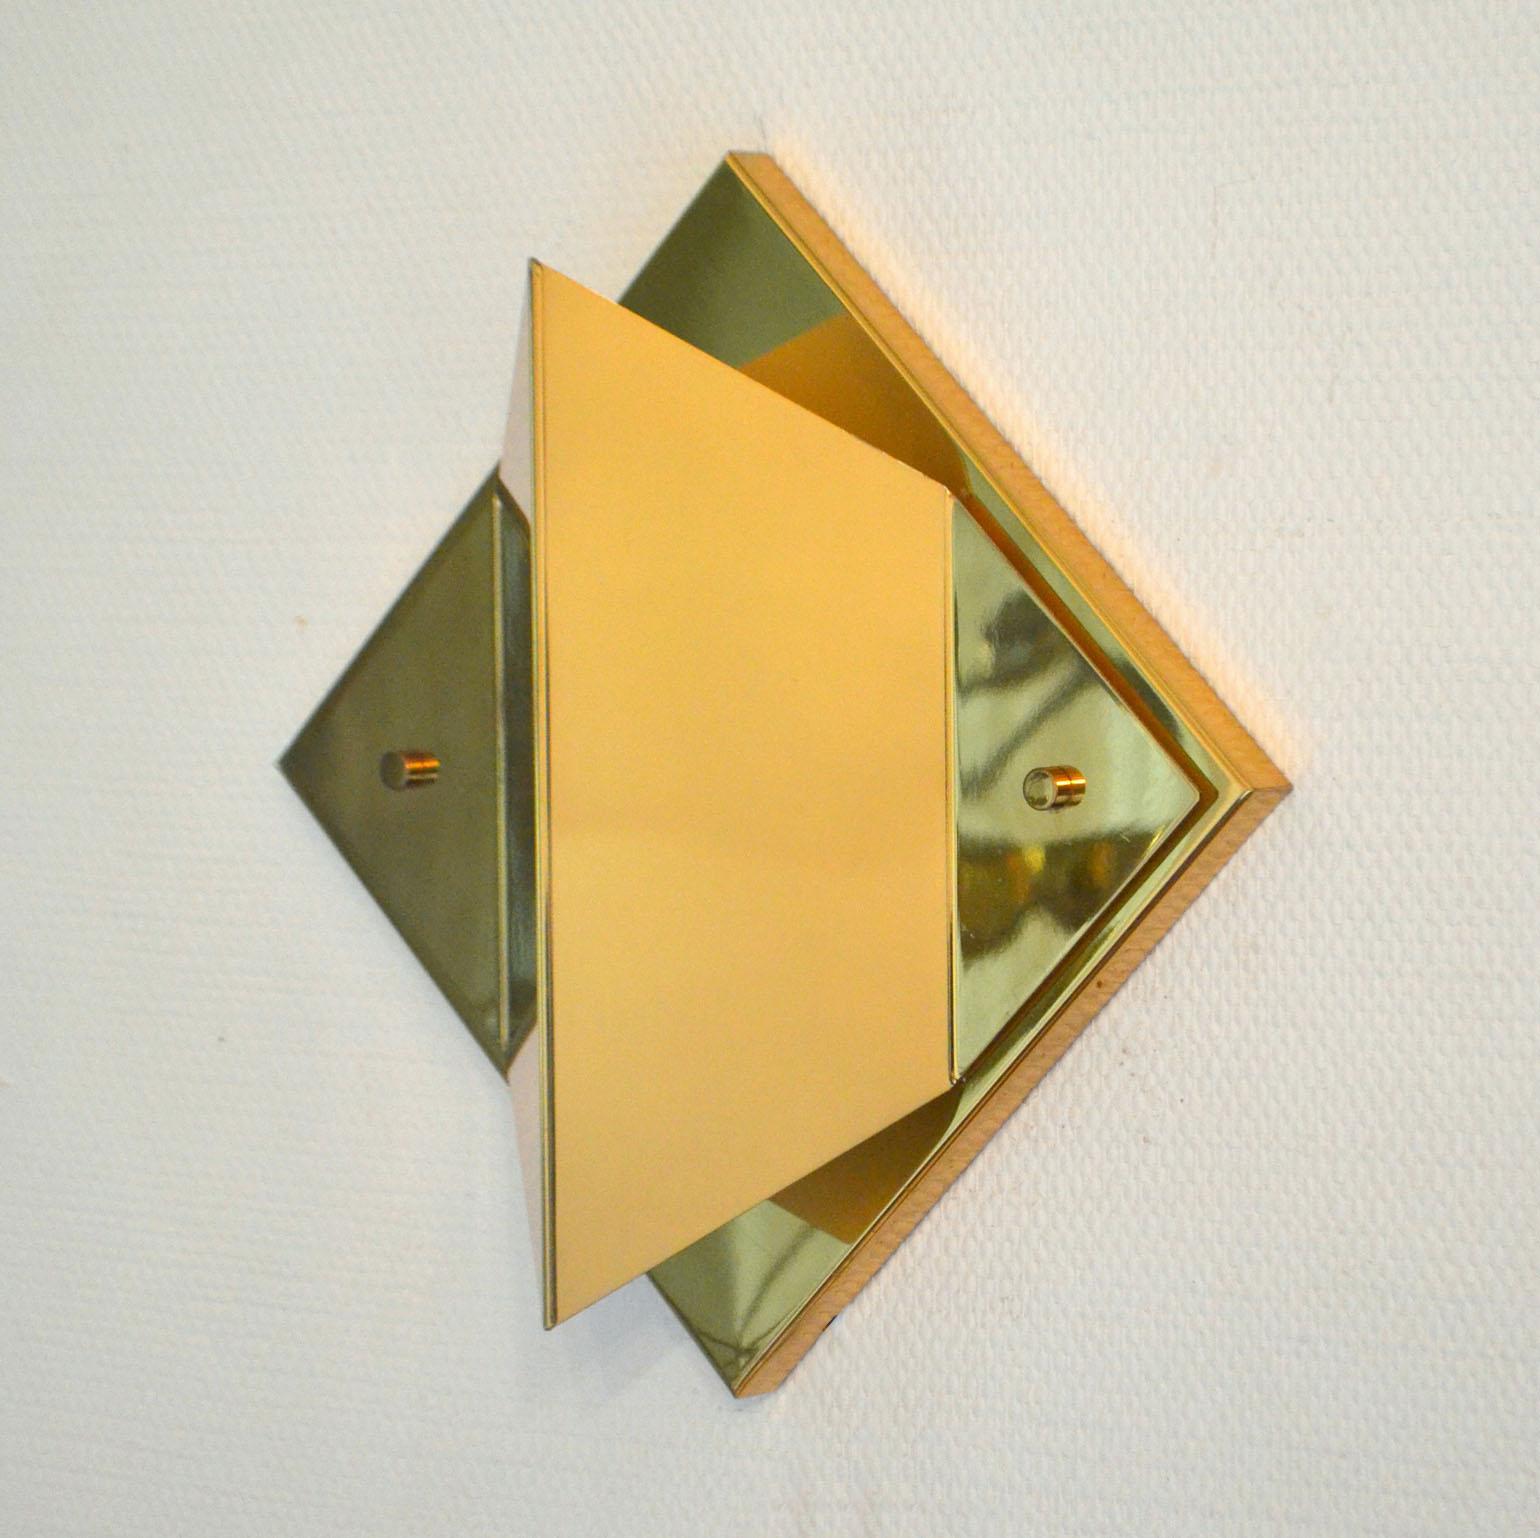 Four polished brass wall sconces are shaped like a diamond. 
A diamond is a quadrilateral, a 2-dimensional flat figure that has four closed sides. But the brass lamps would be categorized as rhombus; because it has four equal sides and its opposite